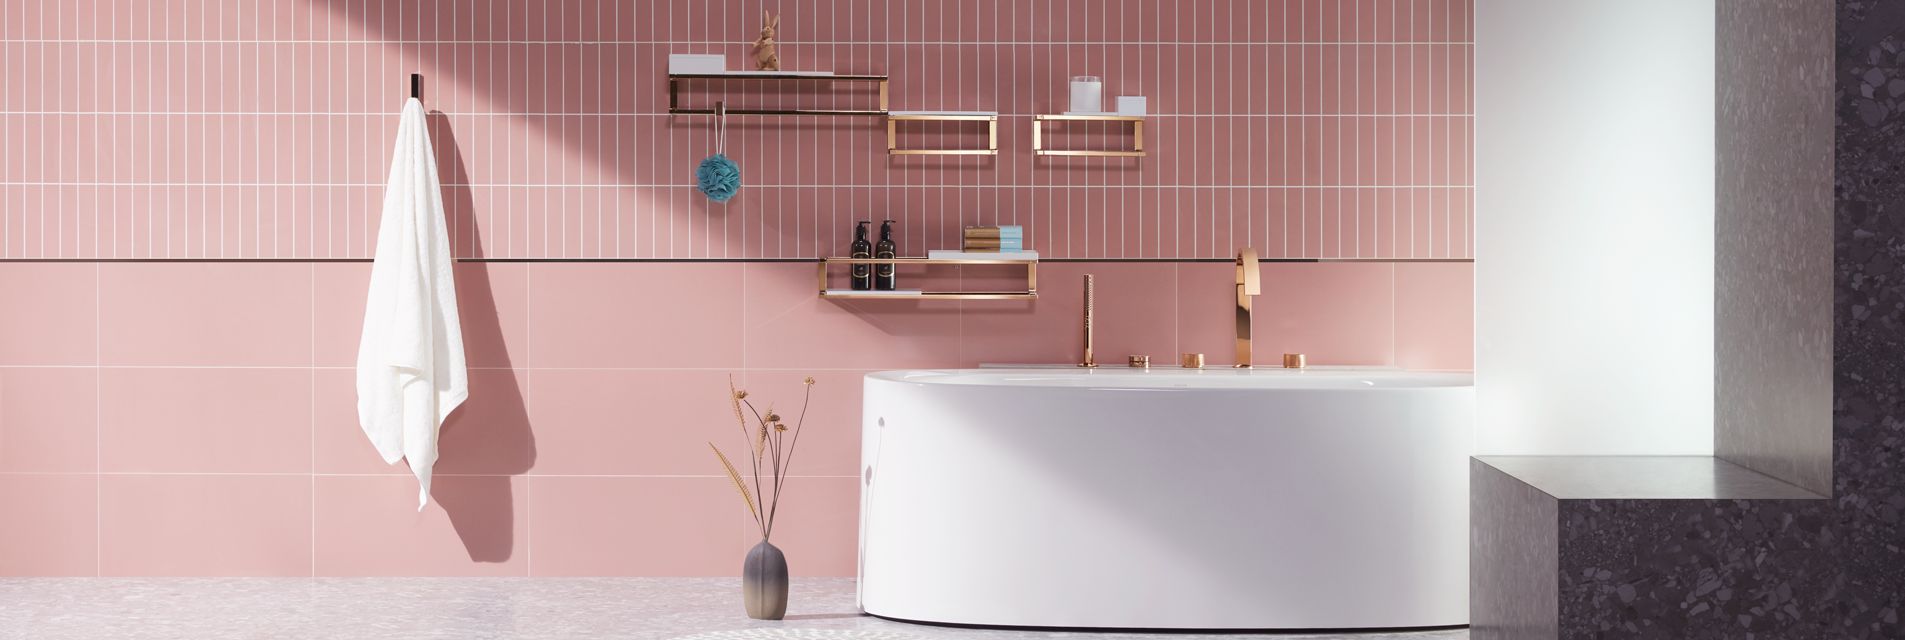 Bathroom Accessories Buying Guide